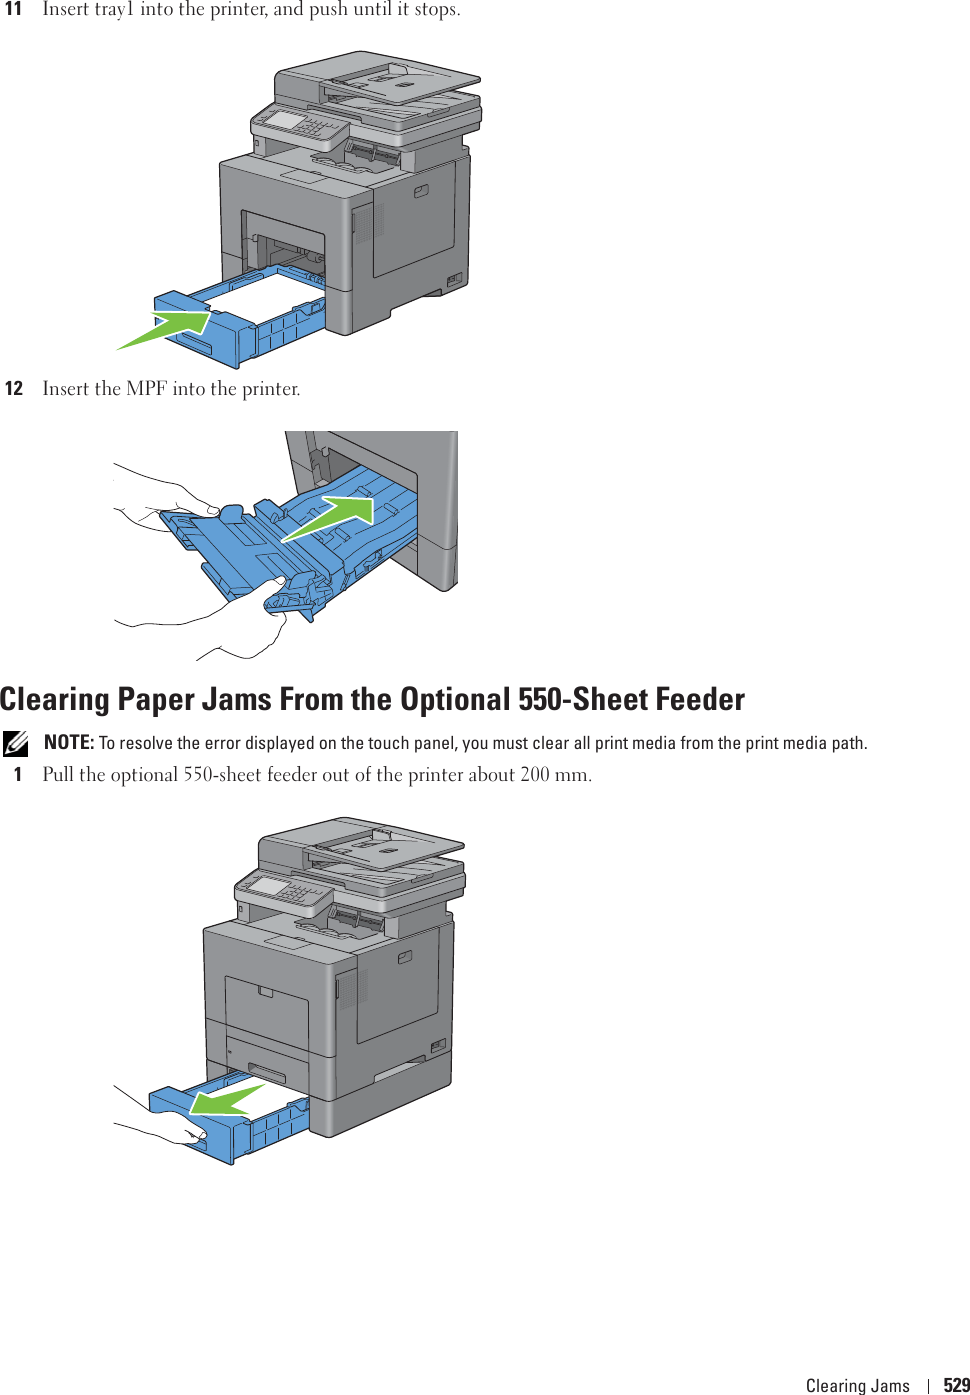 Clearing Jams 52911Insert tray1 into the printer, and push until it stops.12Insert the MPF into the printer.Clearing Paper Jams From the Optional 550-Sheet Feeder NOTE: To resolve the error displayed on the touch panel, you must clear all print media from the print media path.1Pull the optional 550-sheet feeder out of the printer about 200 mm. 